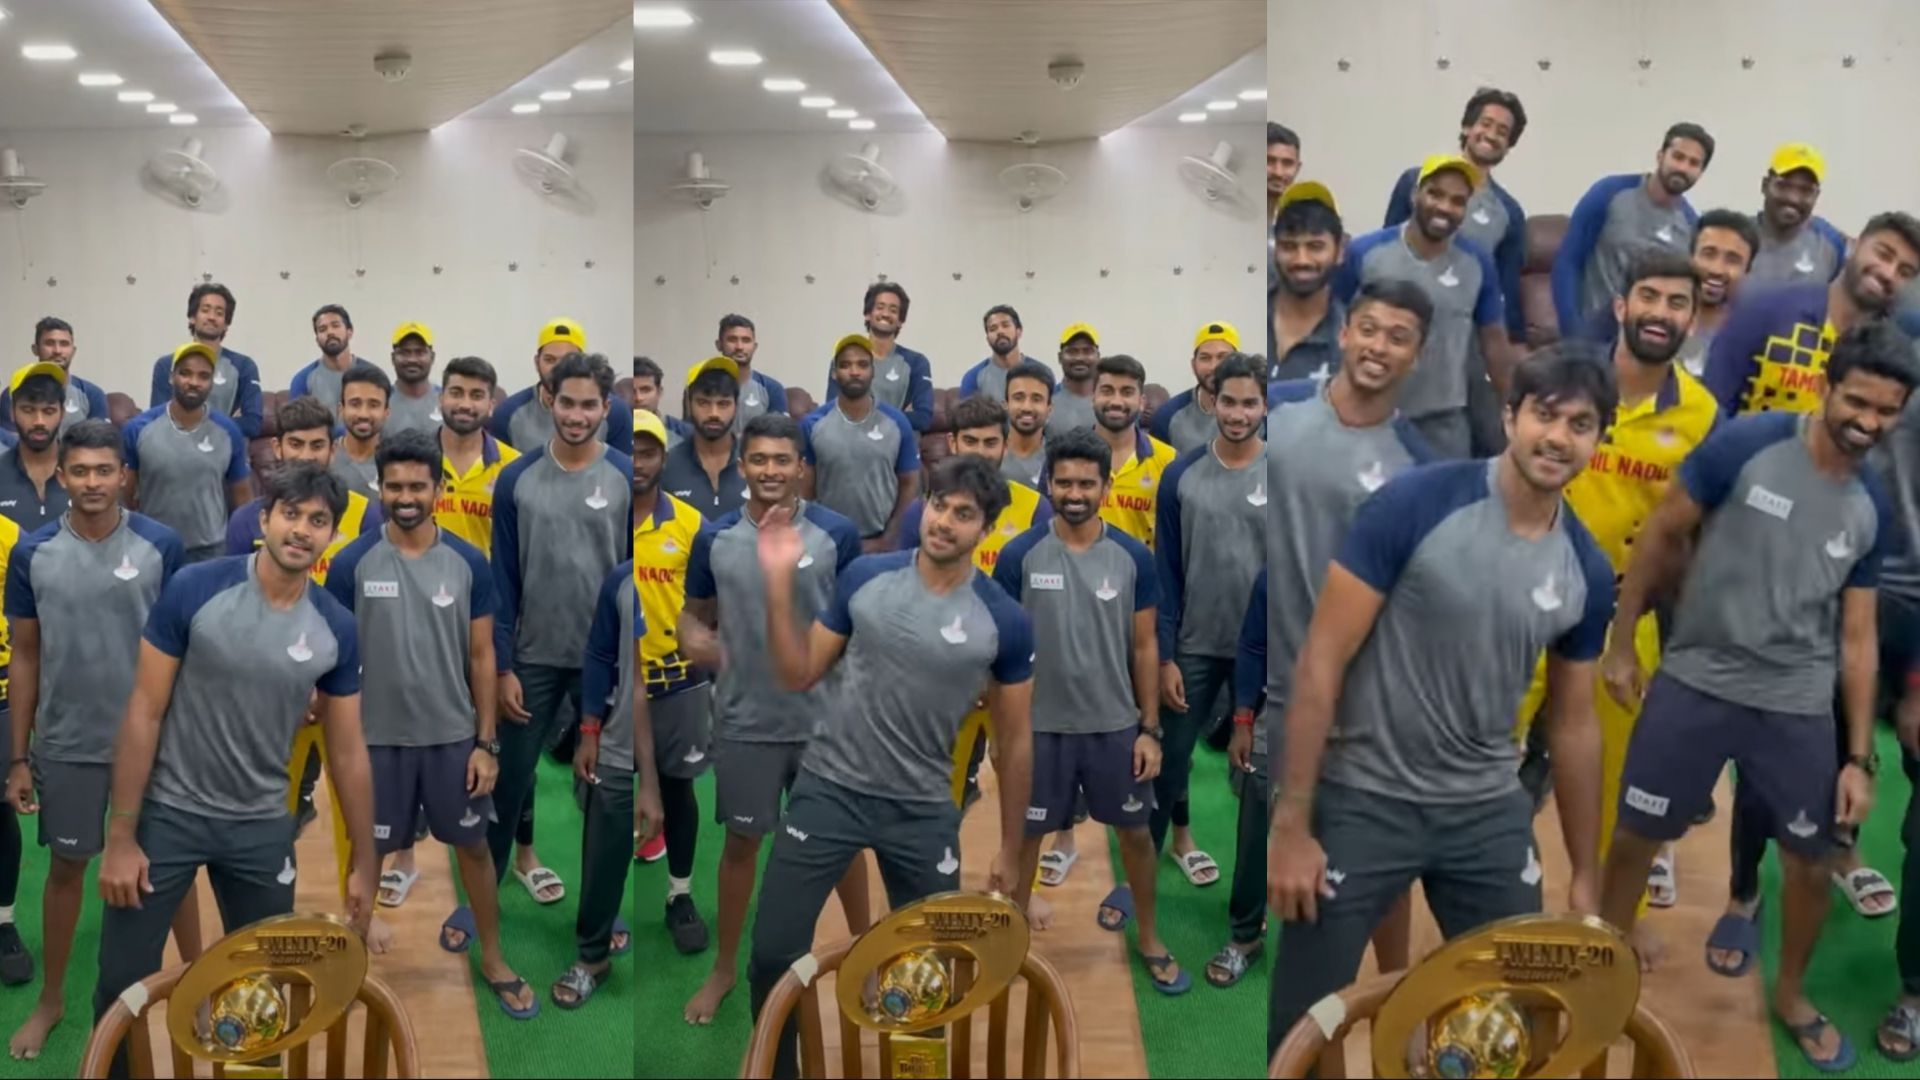 Vijay Shankar posted the video of the team celebration on his official Instagram account